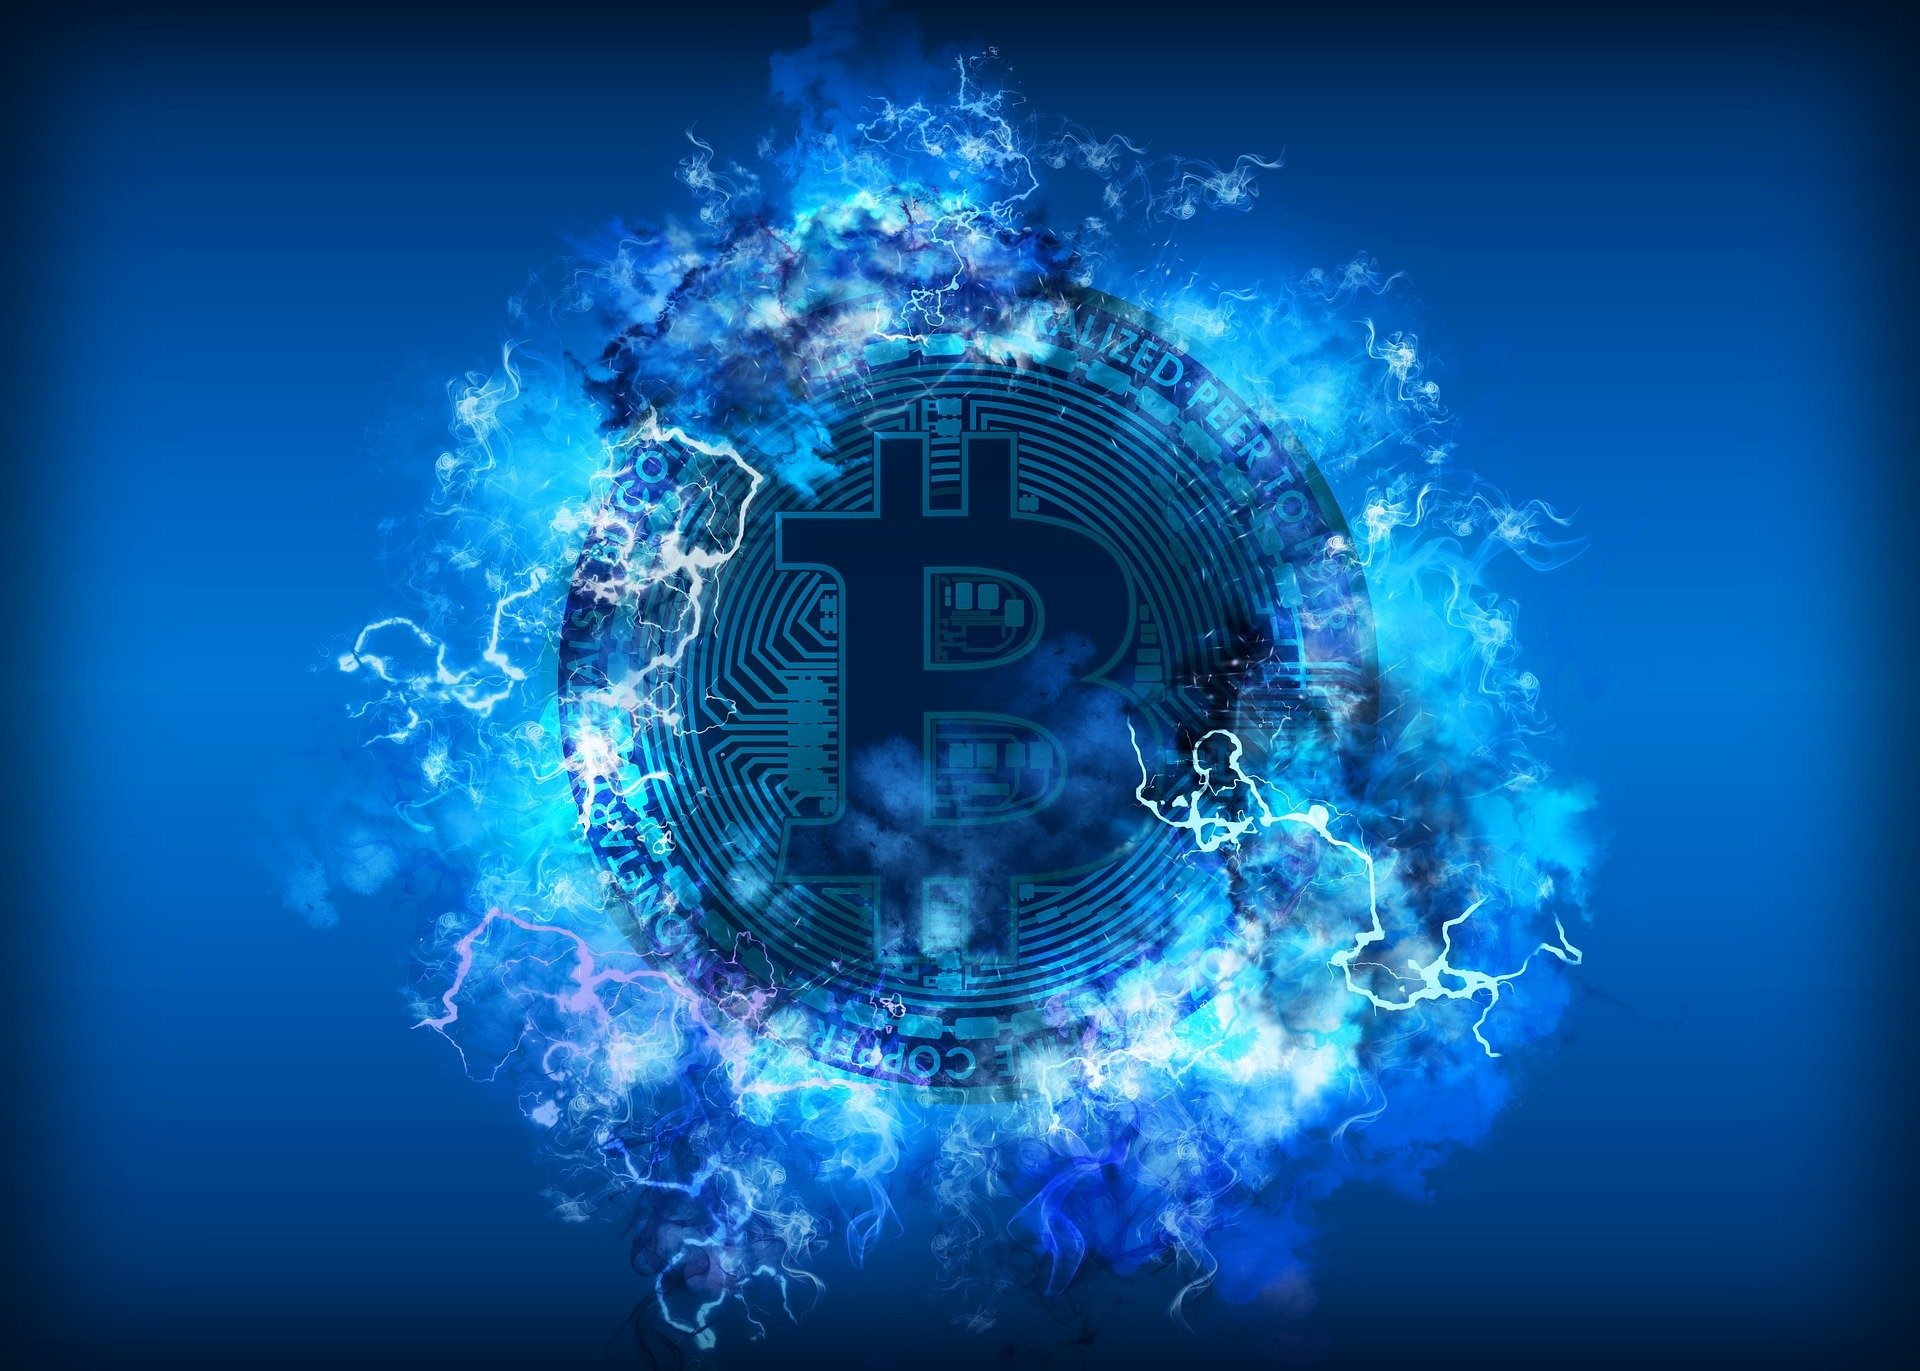 Prime-Coin Review – Diverse Product Offerings and Low Fees